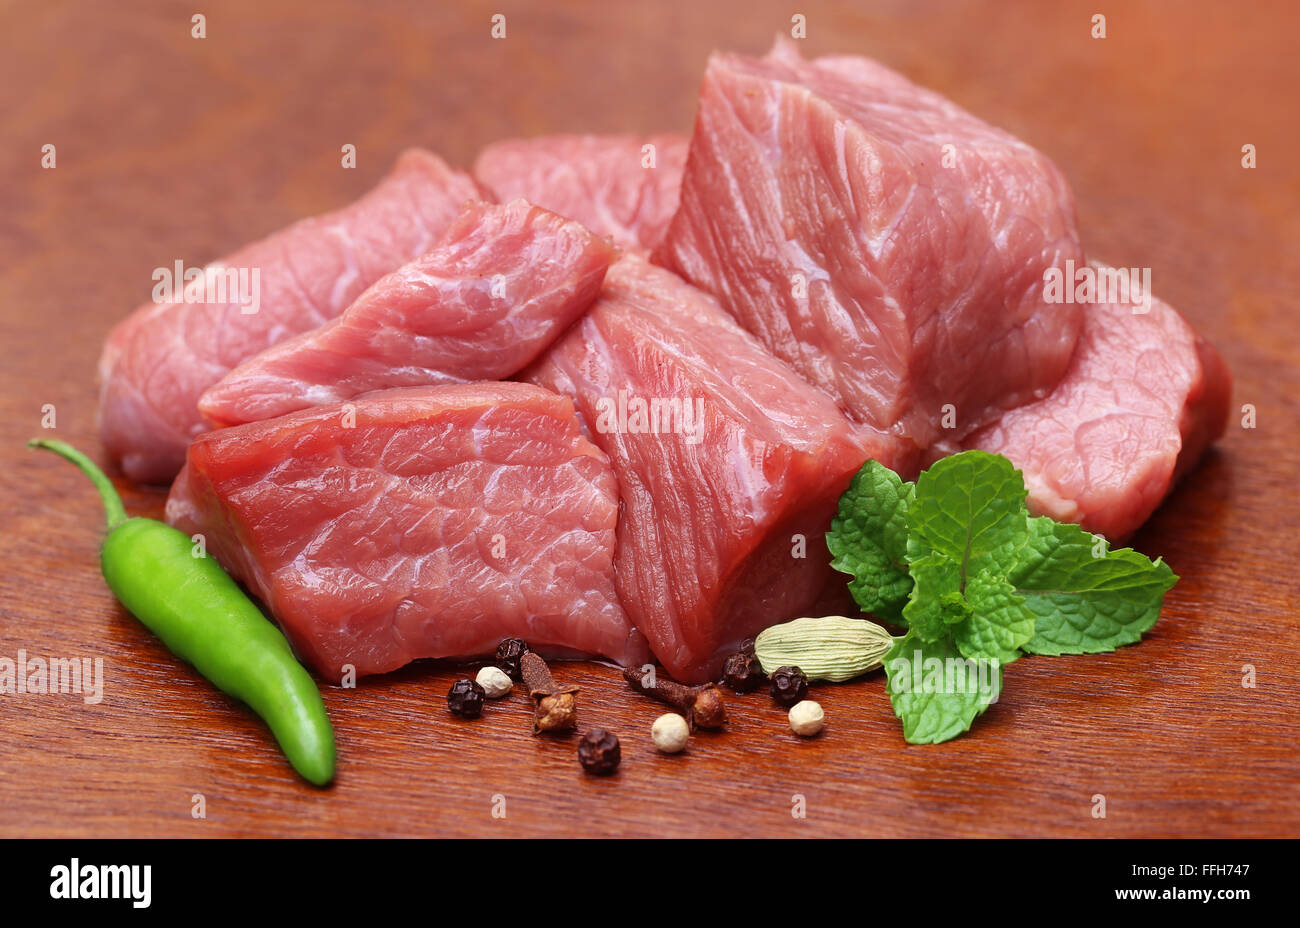 Raw beef with spices on wooden surface Stock Photo